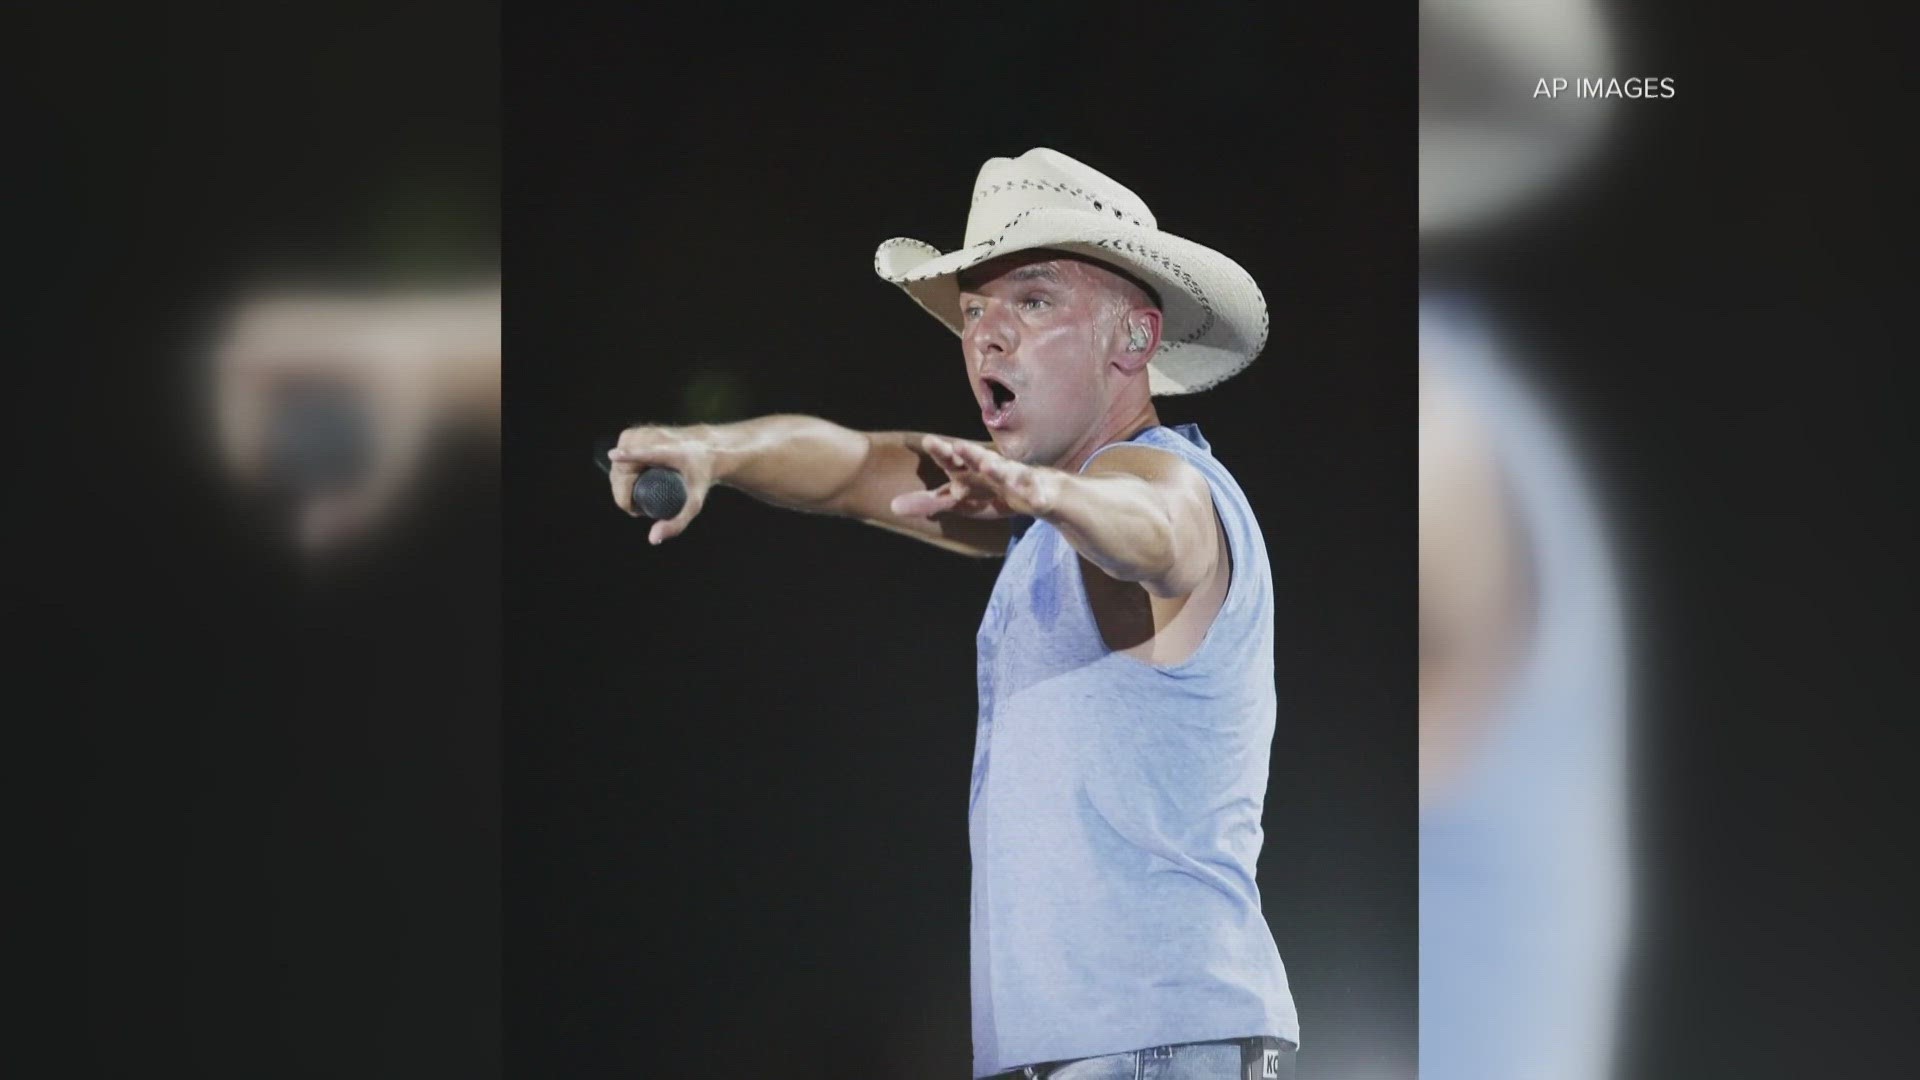 Kenny Chesney is coming back to St. Louis this summer. However, he won't be playing at Busch Stadium like he has in the past.